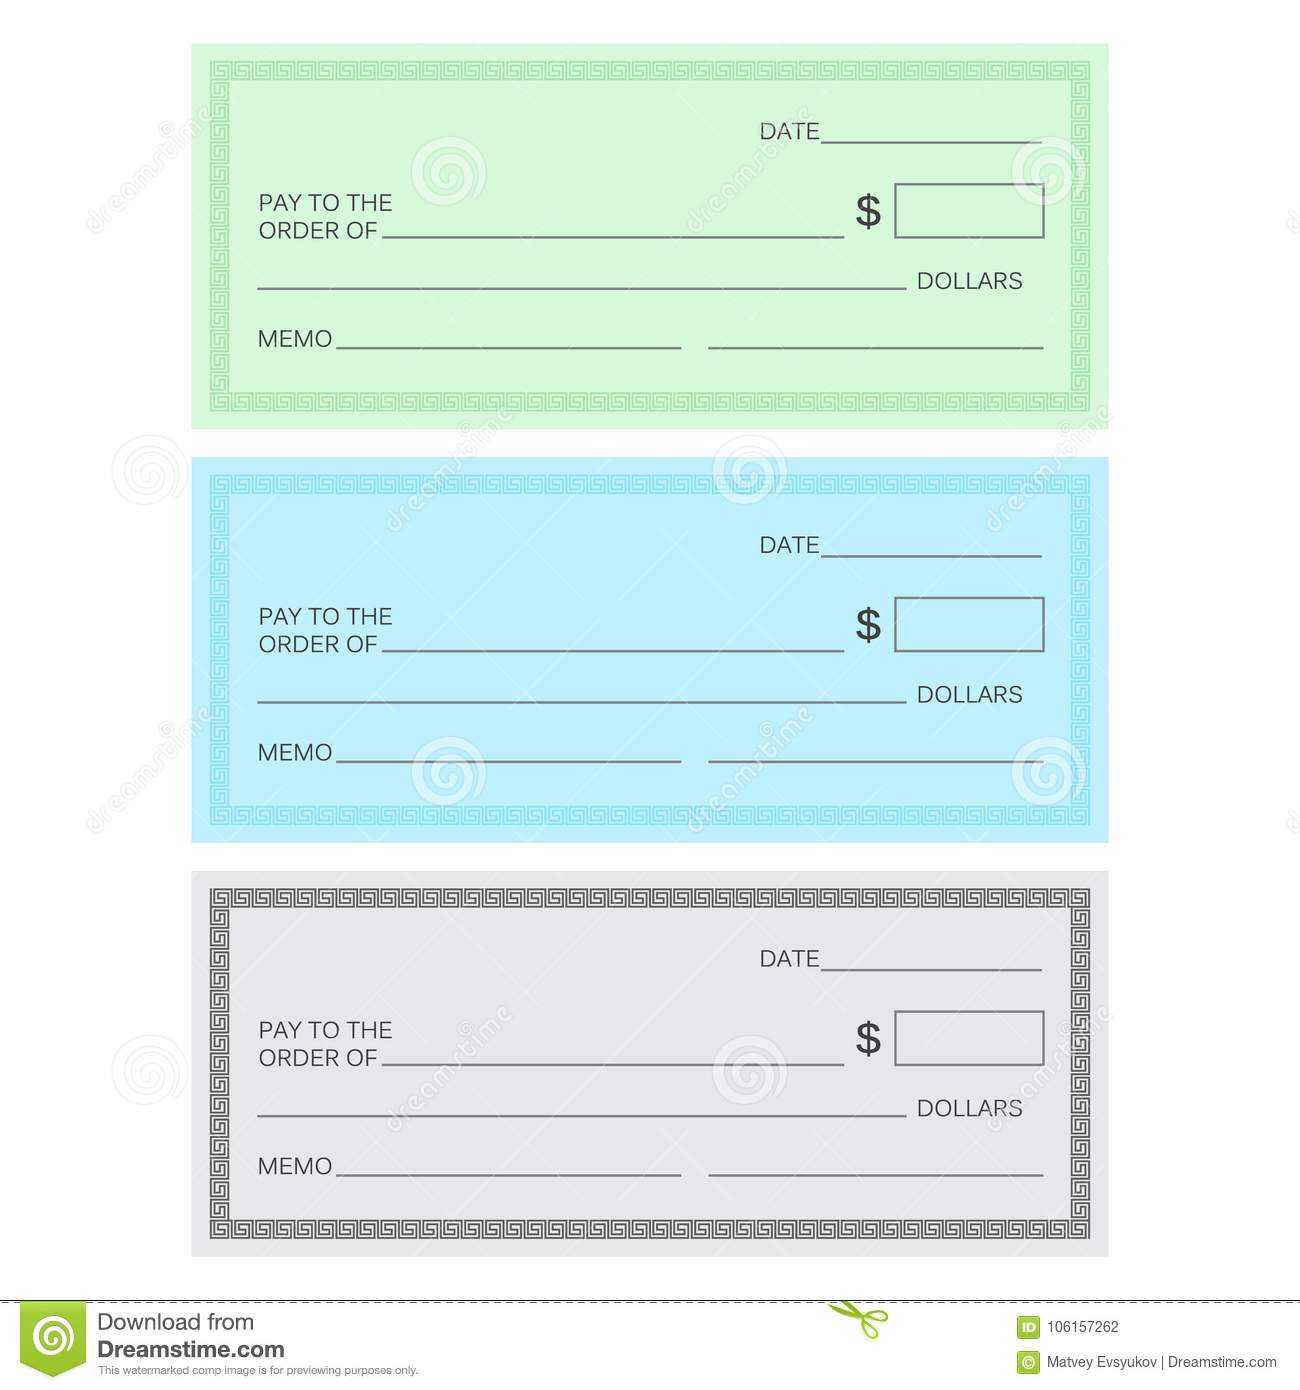 Blank Check Template. Check Template. Banking Check Templ Intended For Blank Business Check Template